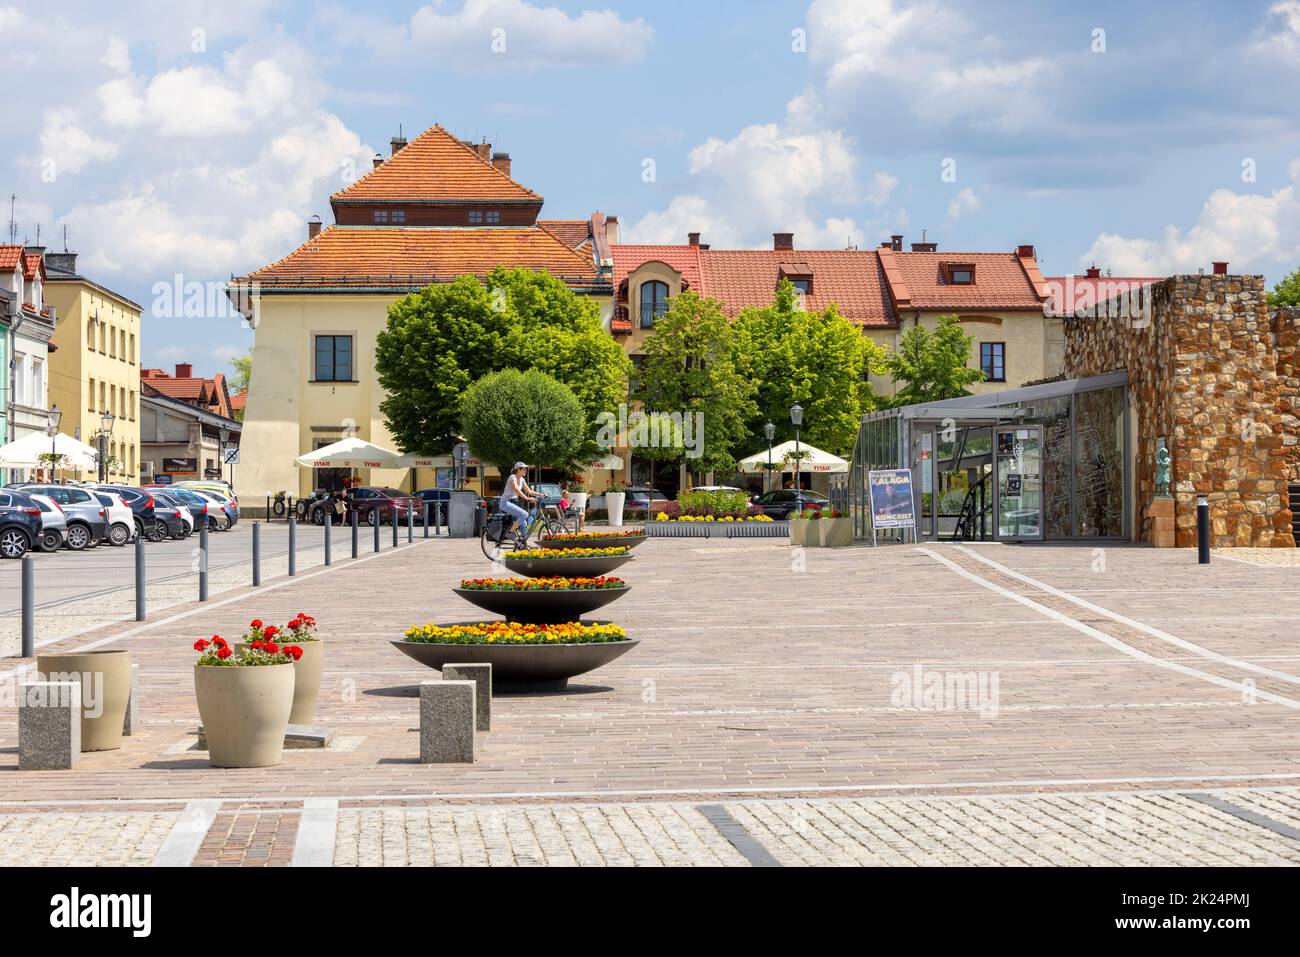 Olkusz, Poland - June 9, 2021: Market square in a small town near Krakow, entrance to the Olkusz Underground Museum in the middle of the square Stock Photo